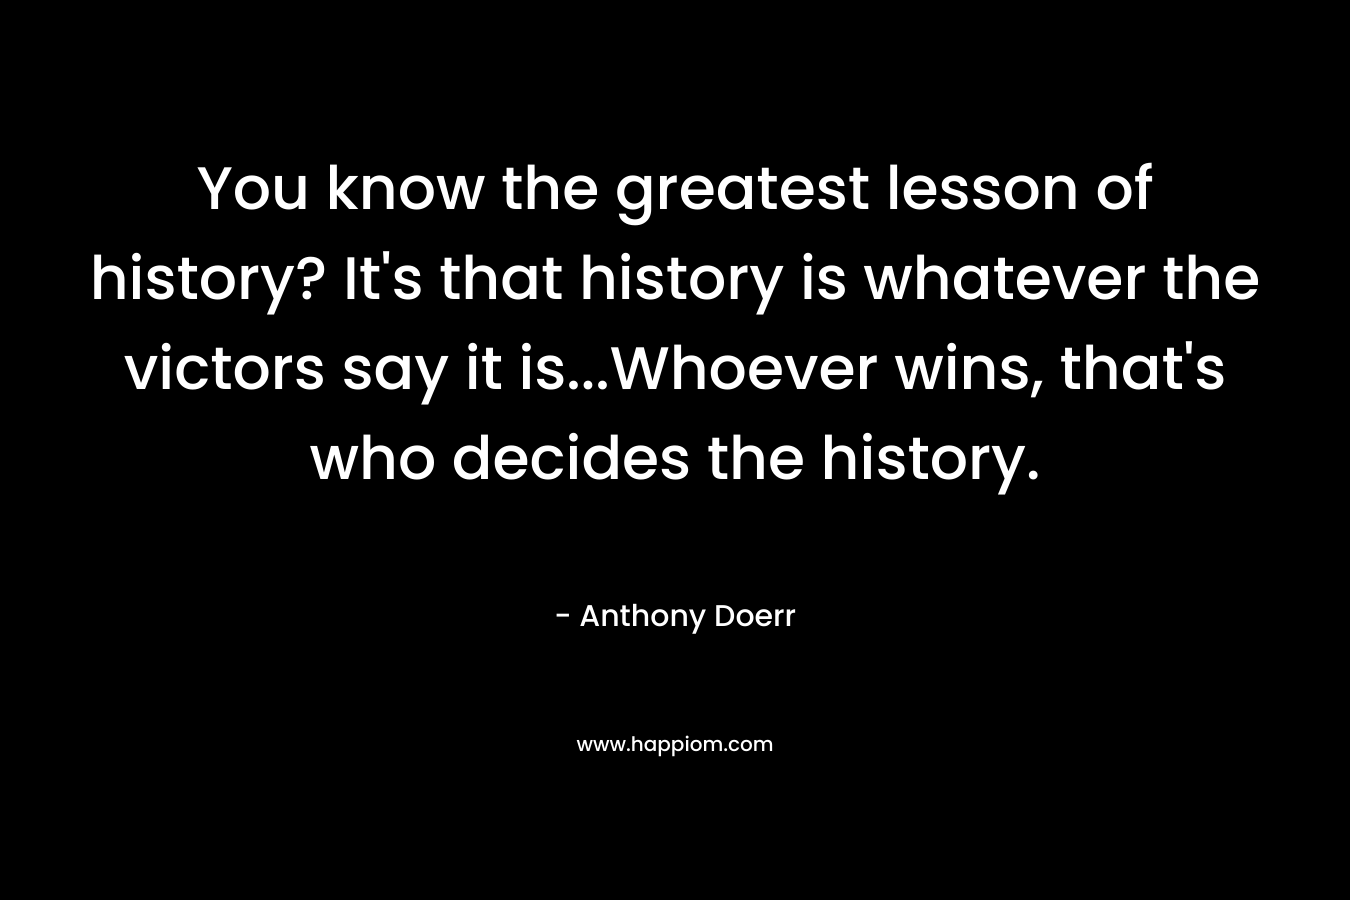 You know the greatest lesson of history? It’s that history is whatever the victors say it is…Whoever wins, that’s who decides the history. – Anthony Doerr